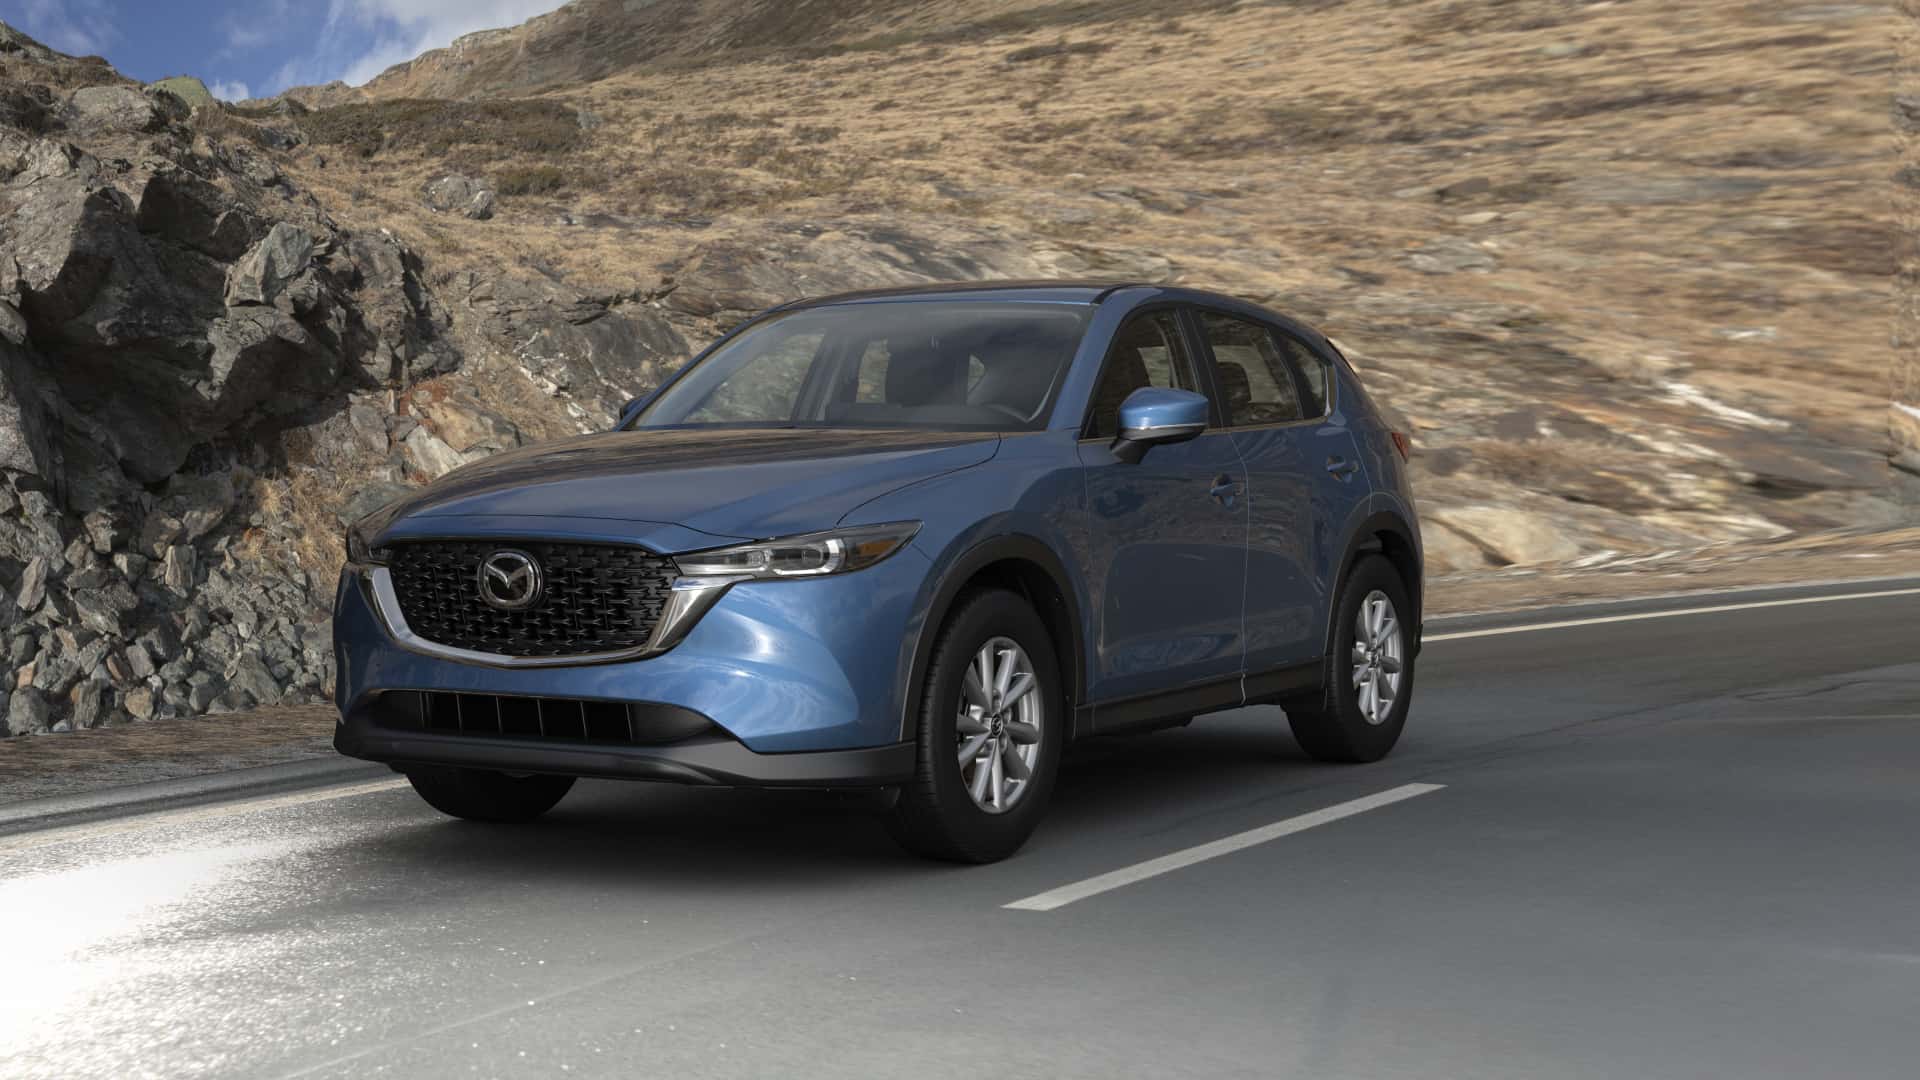 2023 Mazda CX-5 2.5 S Deep Crystal Blue Mica | Mazda of South Charlotte in Pineville NC